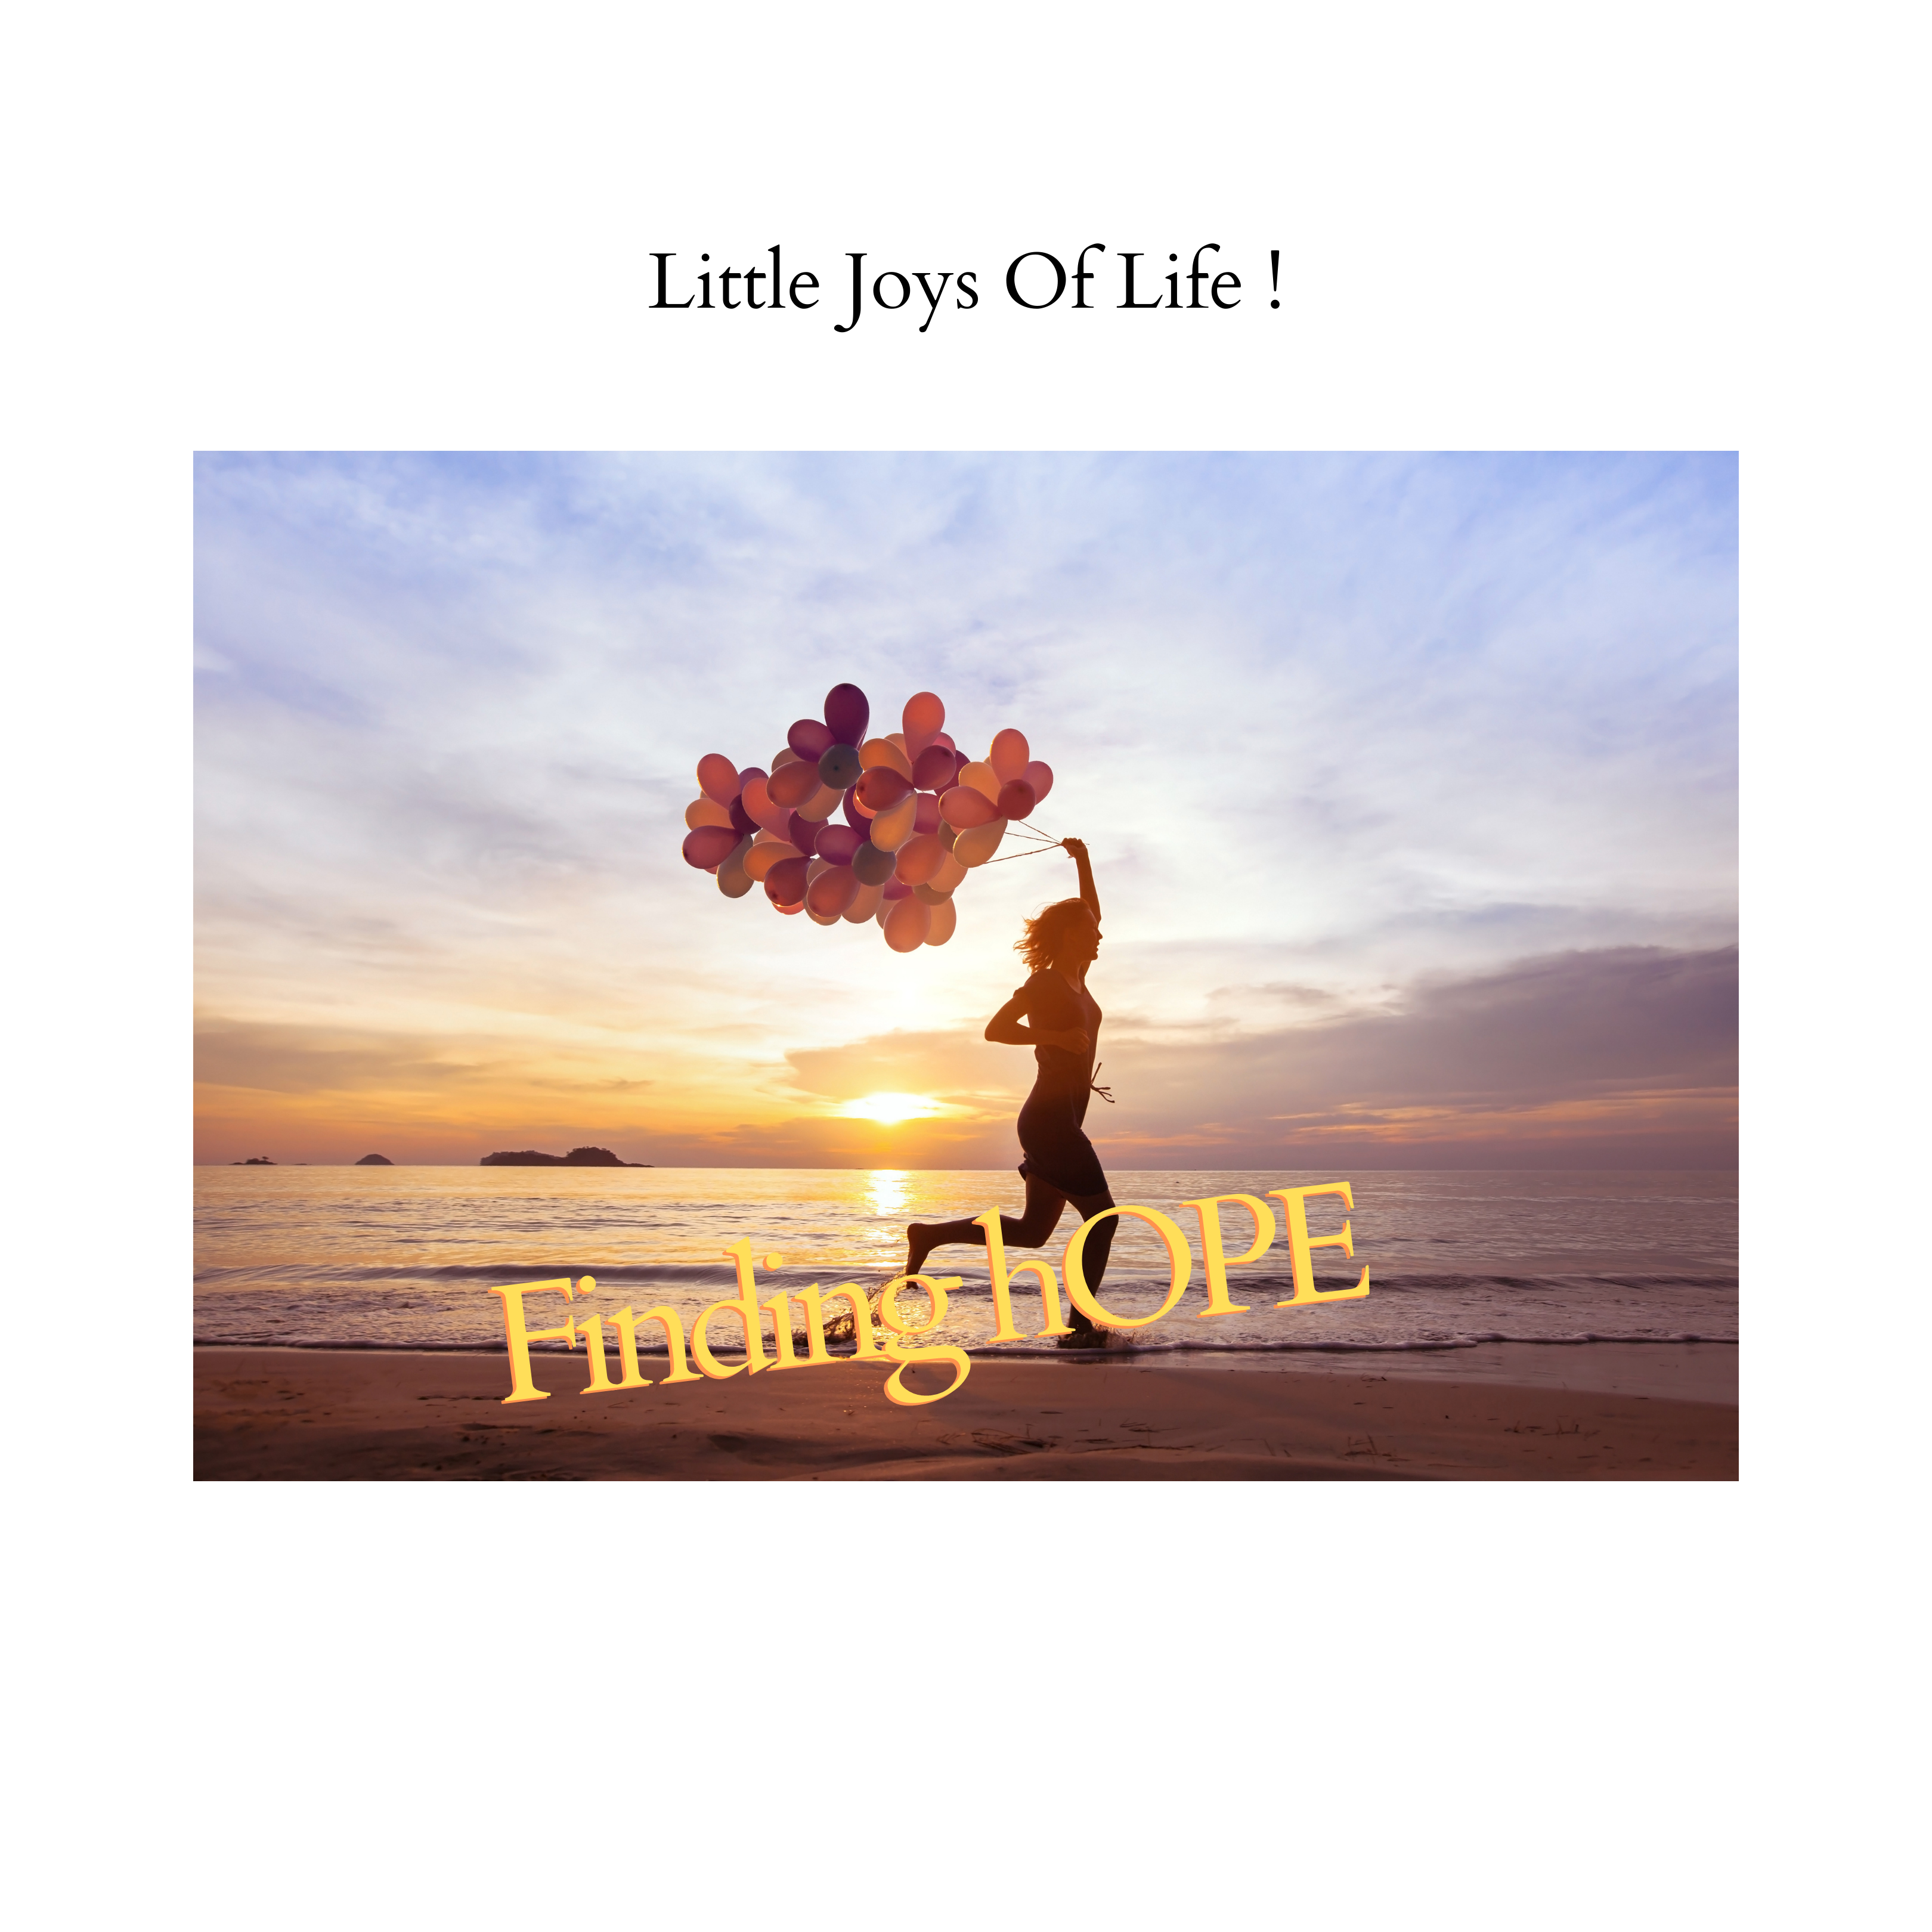 Little joys of Life – Ray of Hope !